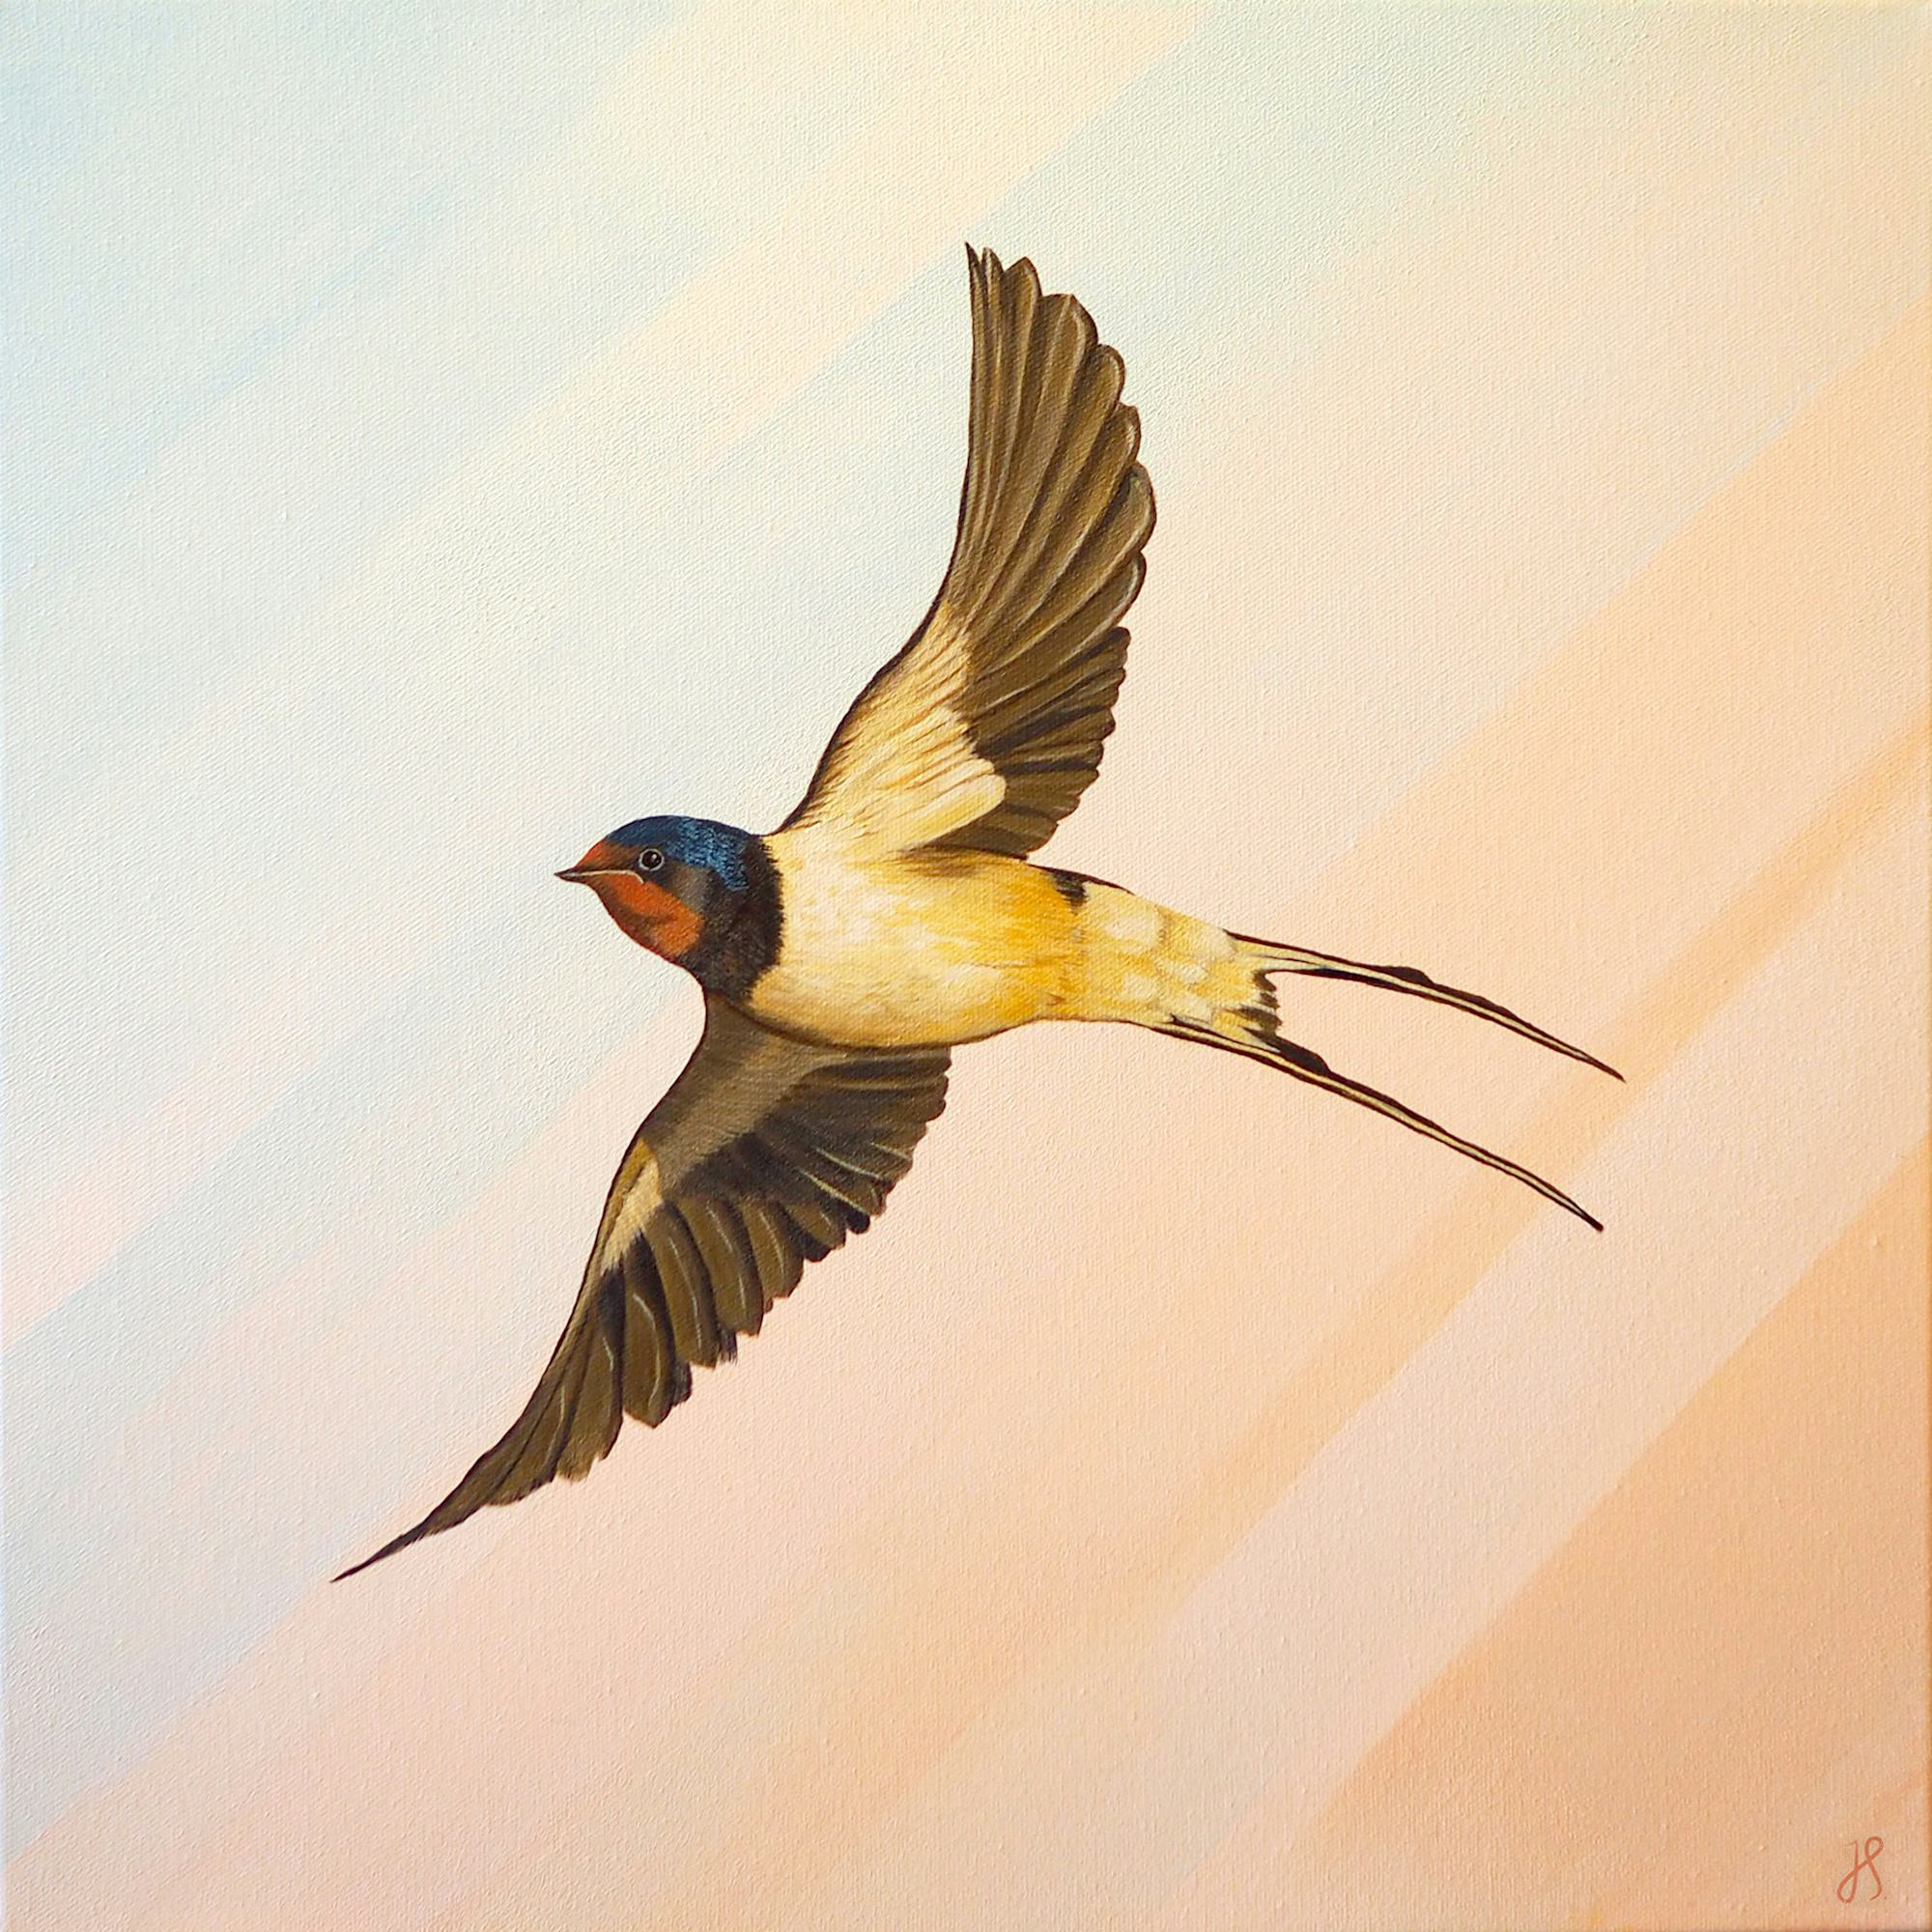 A painting of a welcome swallow with its wings spread, on an abstract pastel background.